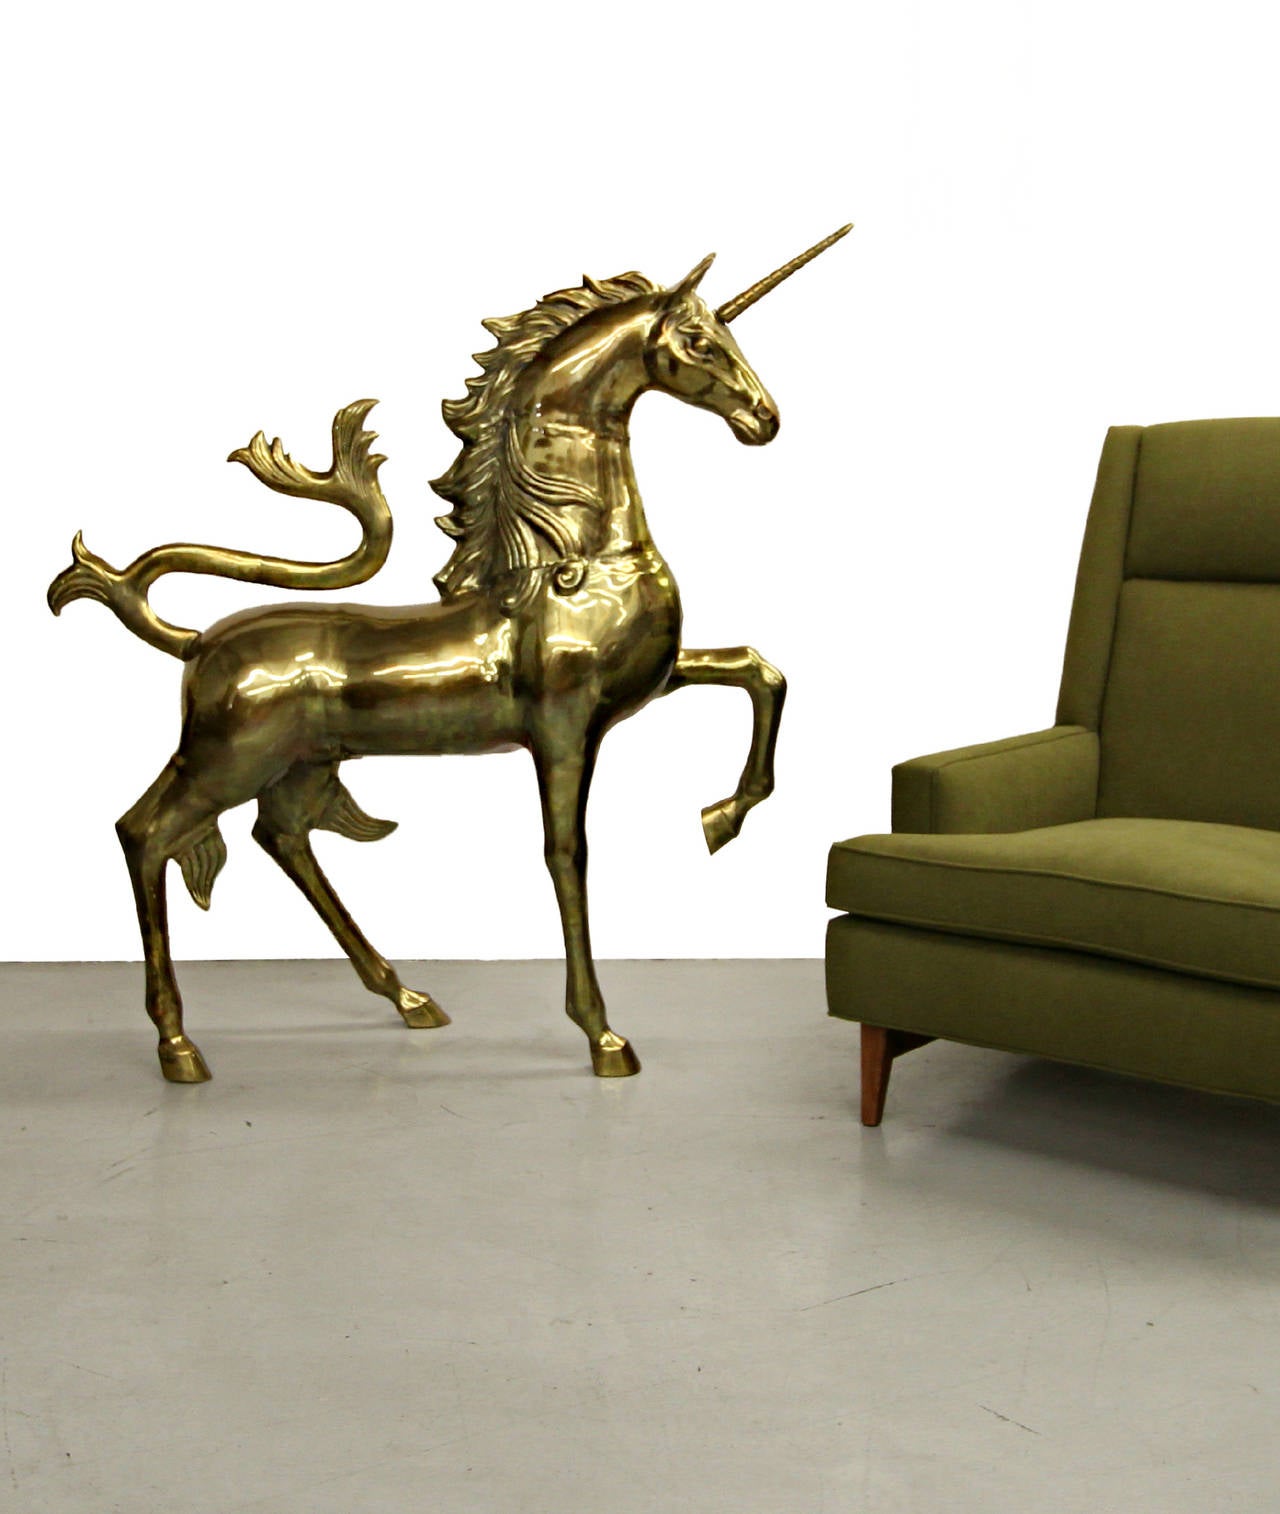 Vintage 4ft tall solid brass unicorn floor statue.  Not much to say other than if you love unicorns, this one is the unicorn of all unicorns. You can ride him for goodness sake.  Been looking for that conversation piece, look NO further, unicorn